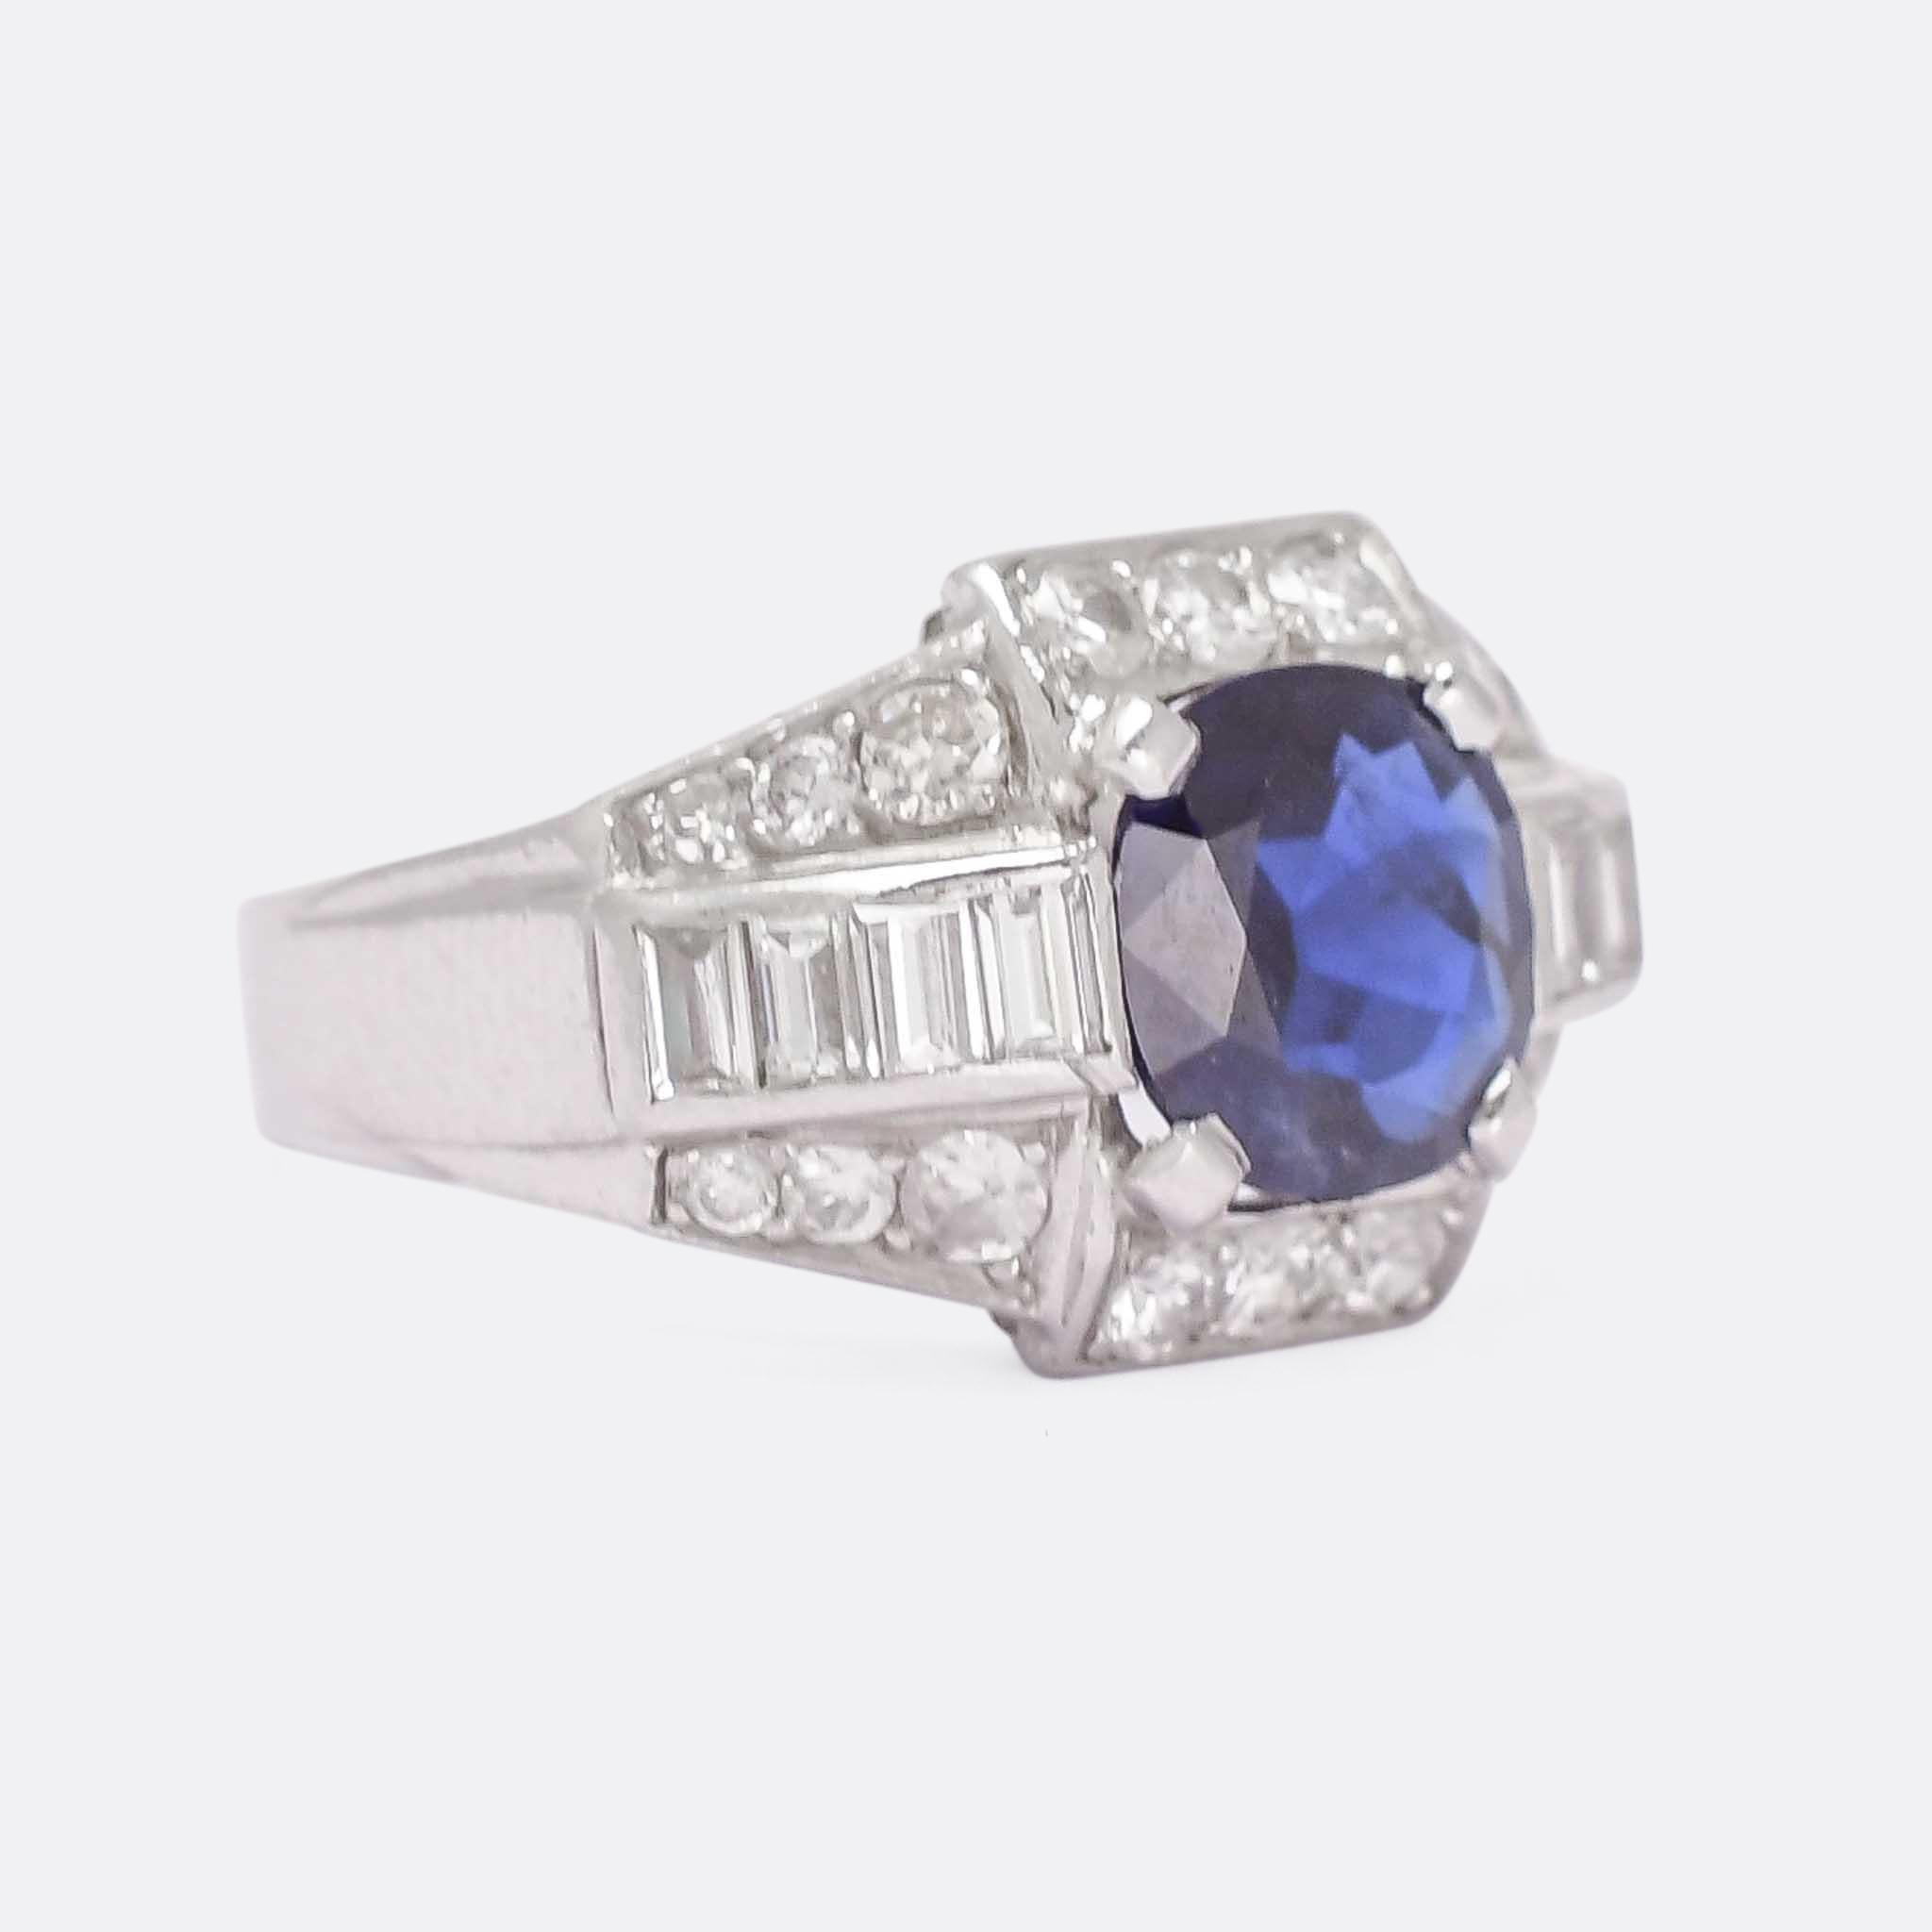 A stunning French Art Deco cocktail ring set with a principal cushion shaped blue sapphire and a combination of baguette and brilliant cut diamonds. The design is bold and very typically late deco, with geometric shapes and lines, while looking